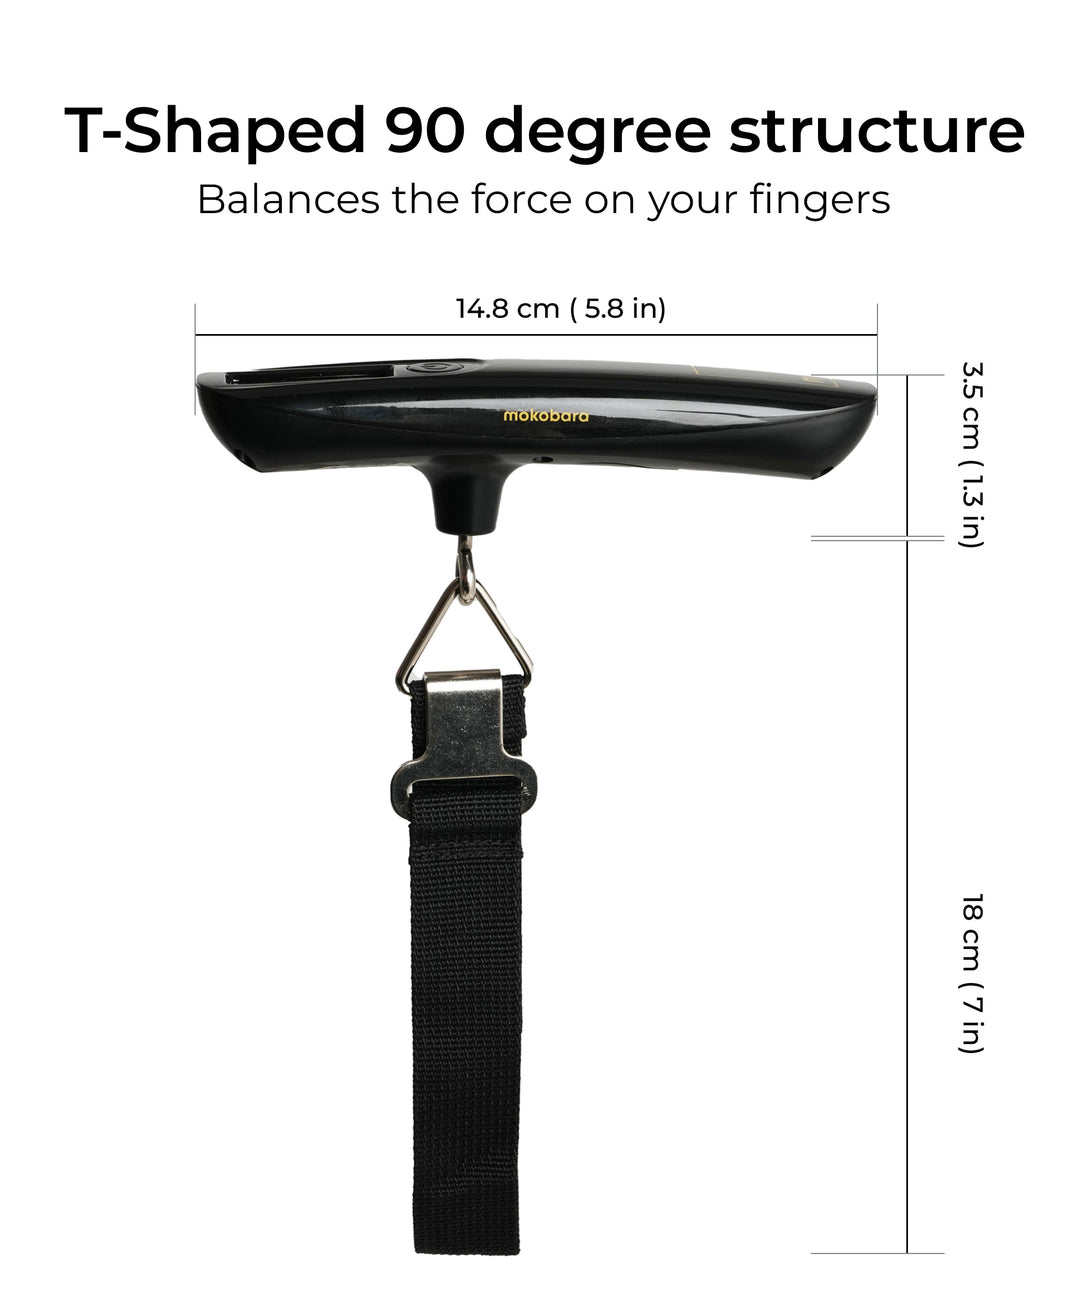 The Luggage Scale